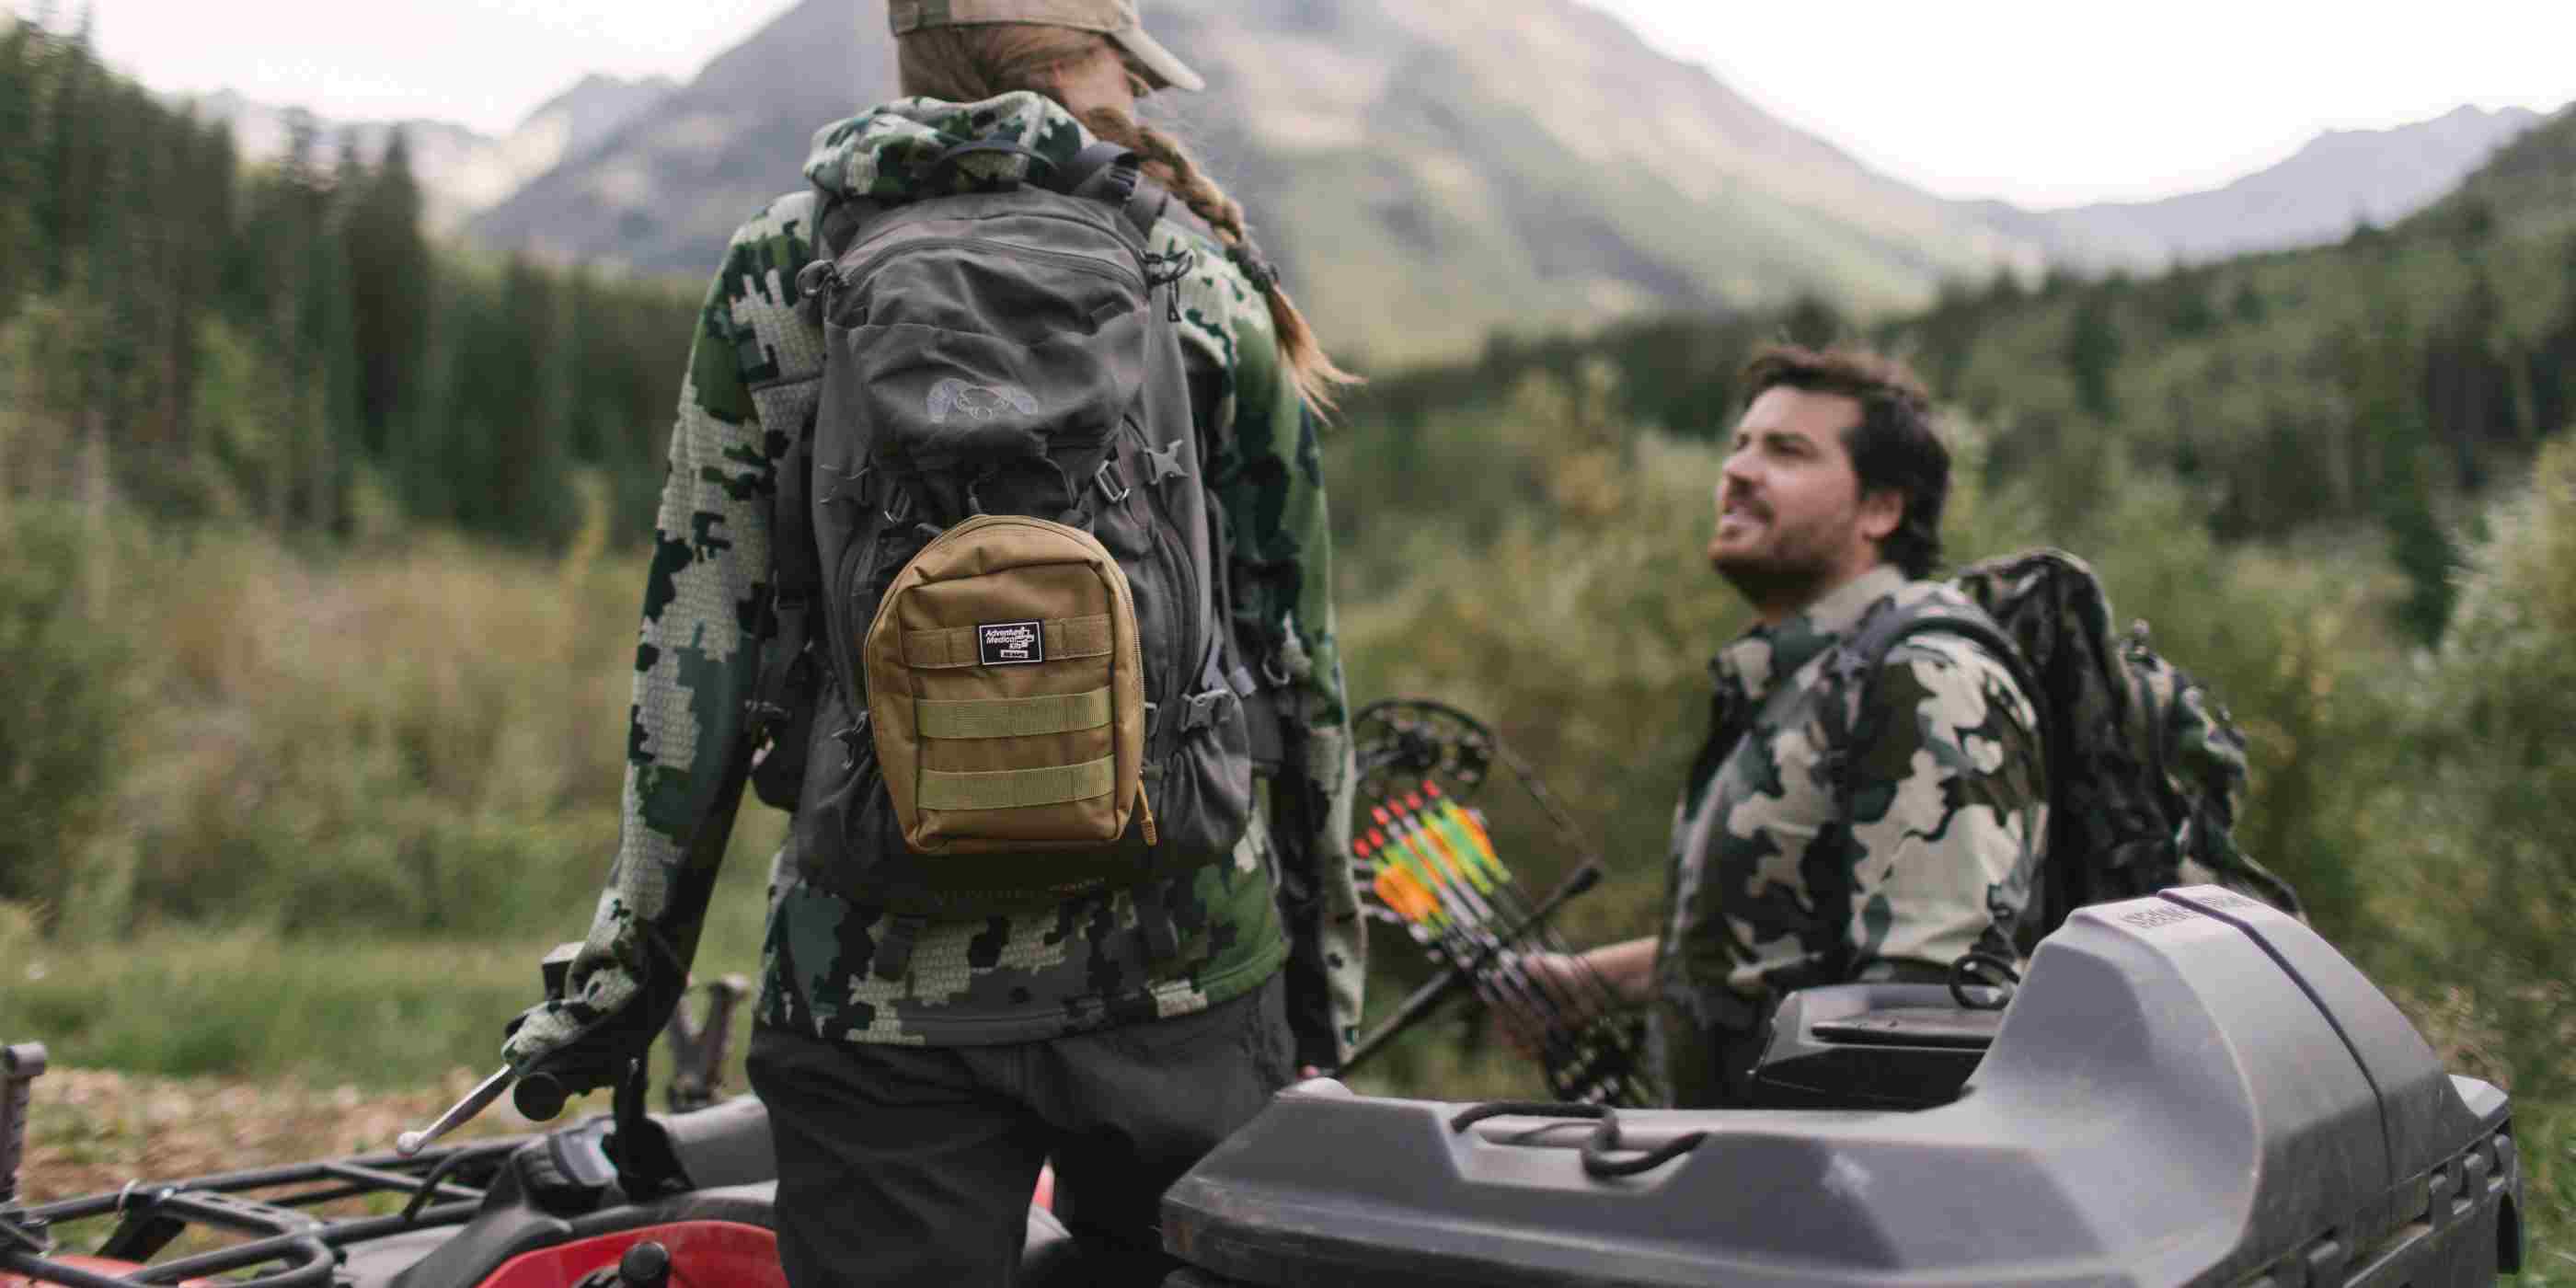 MOLLE Bag Trauma Kit 1.0 - Khaki woman with kit on backpack wearing camo standing on ATV next to man